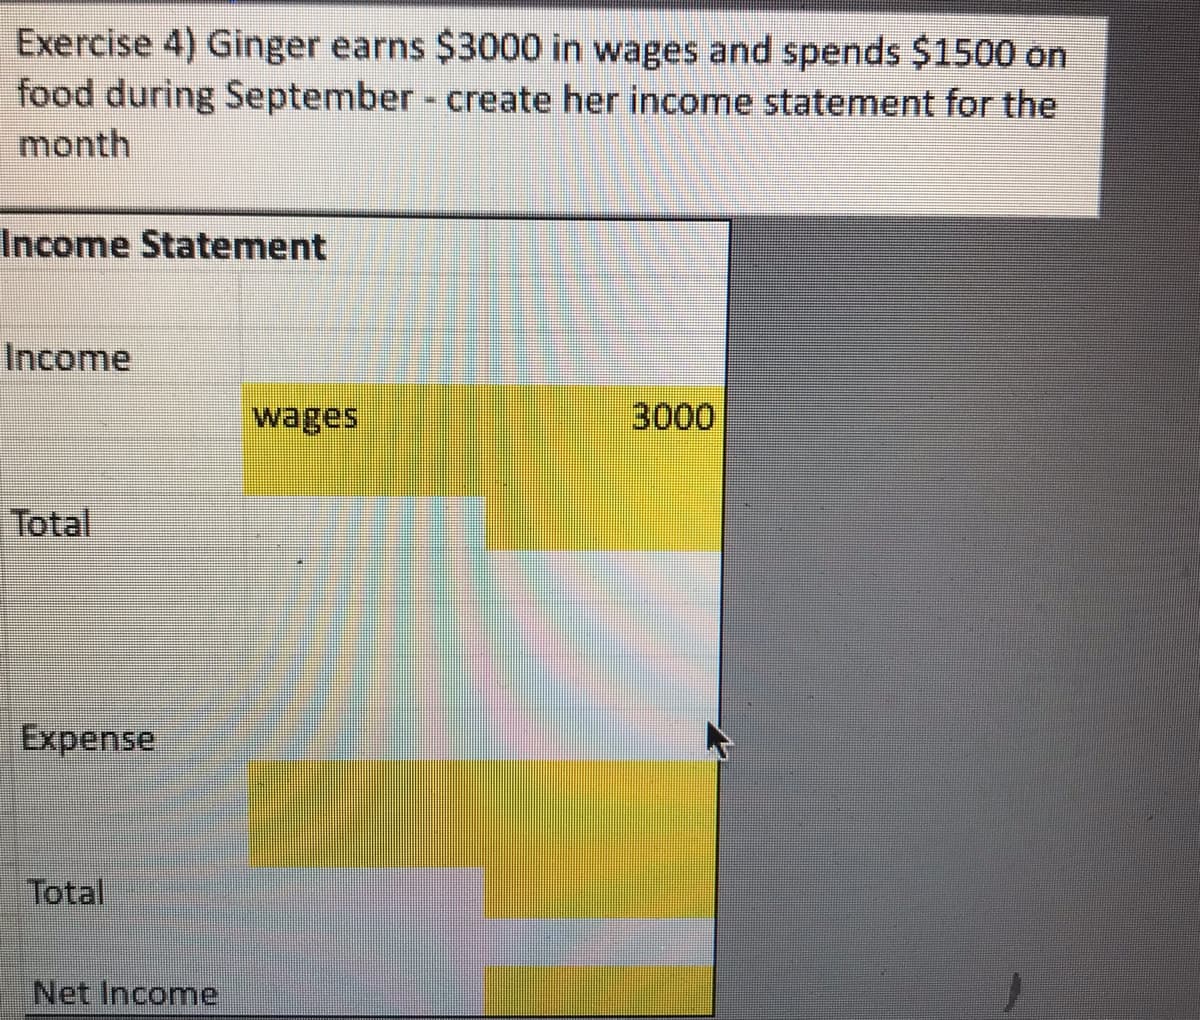 Exercise 4) Ginger earns $3000 in wages and spends $1500 on
food during September - create her income statement for the
month
Income Statement
Income
Total
Expense
Total
Net Income
wages
3000